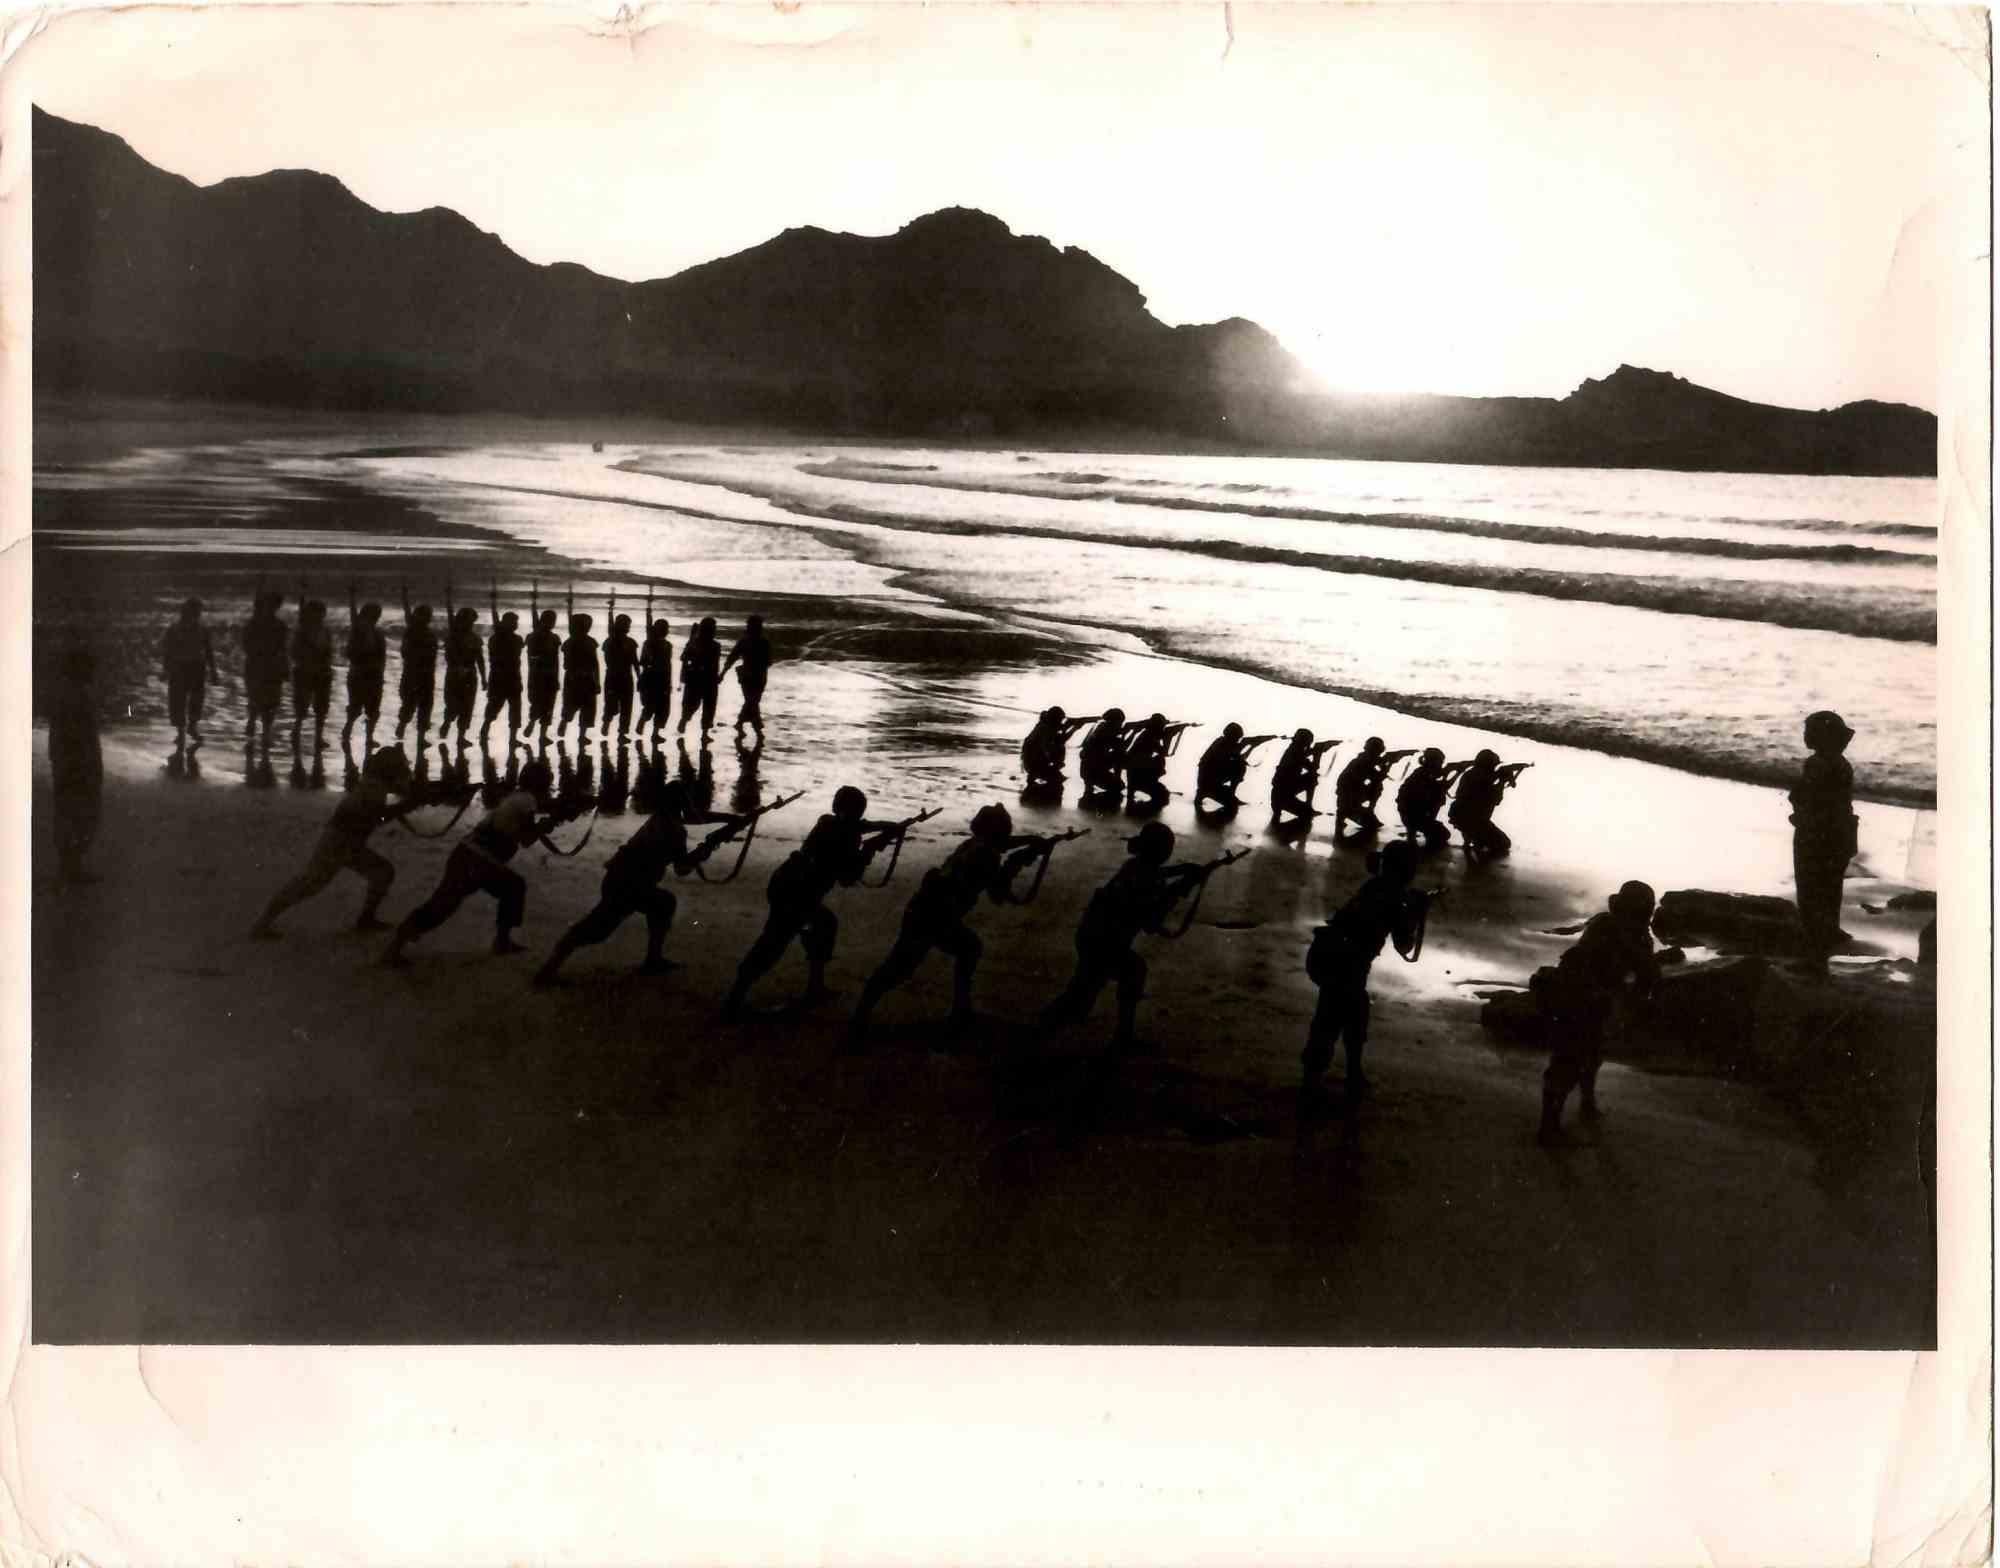 Unknown Black and White Photograph - Women's Military Exercises in China - Vintage B/W photo - 1973